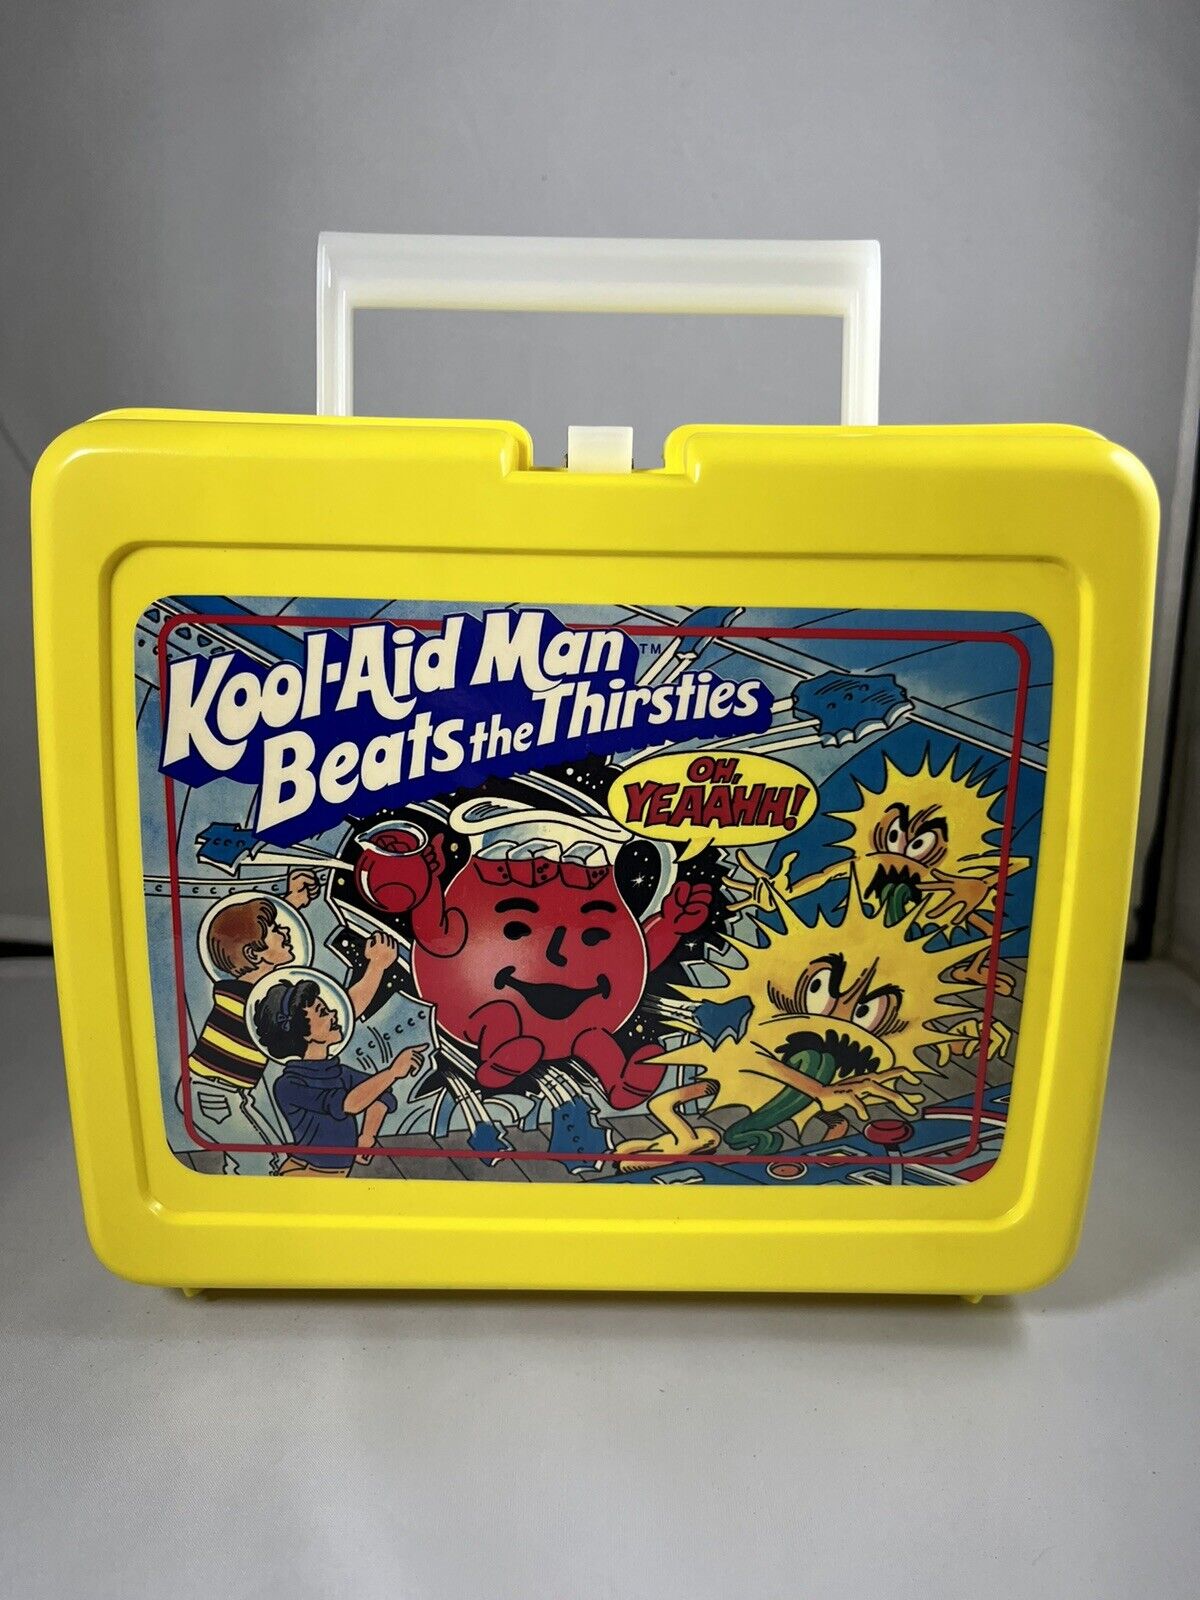 Vintage Kool-Aid Man Beats the Thirsties Vintage Thermos Lunch Box Yellow